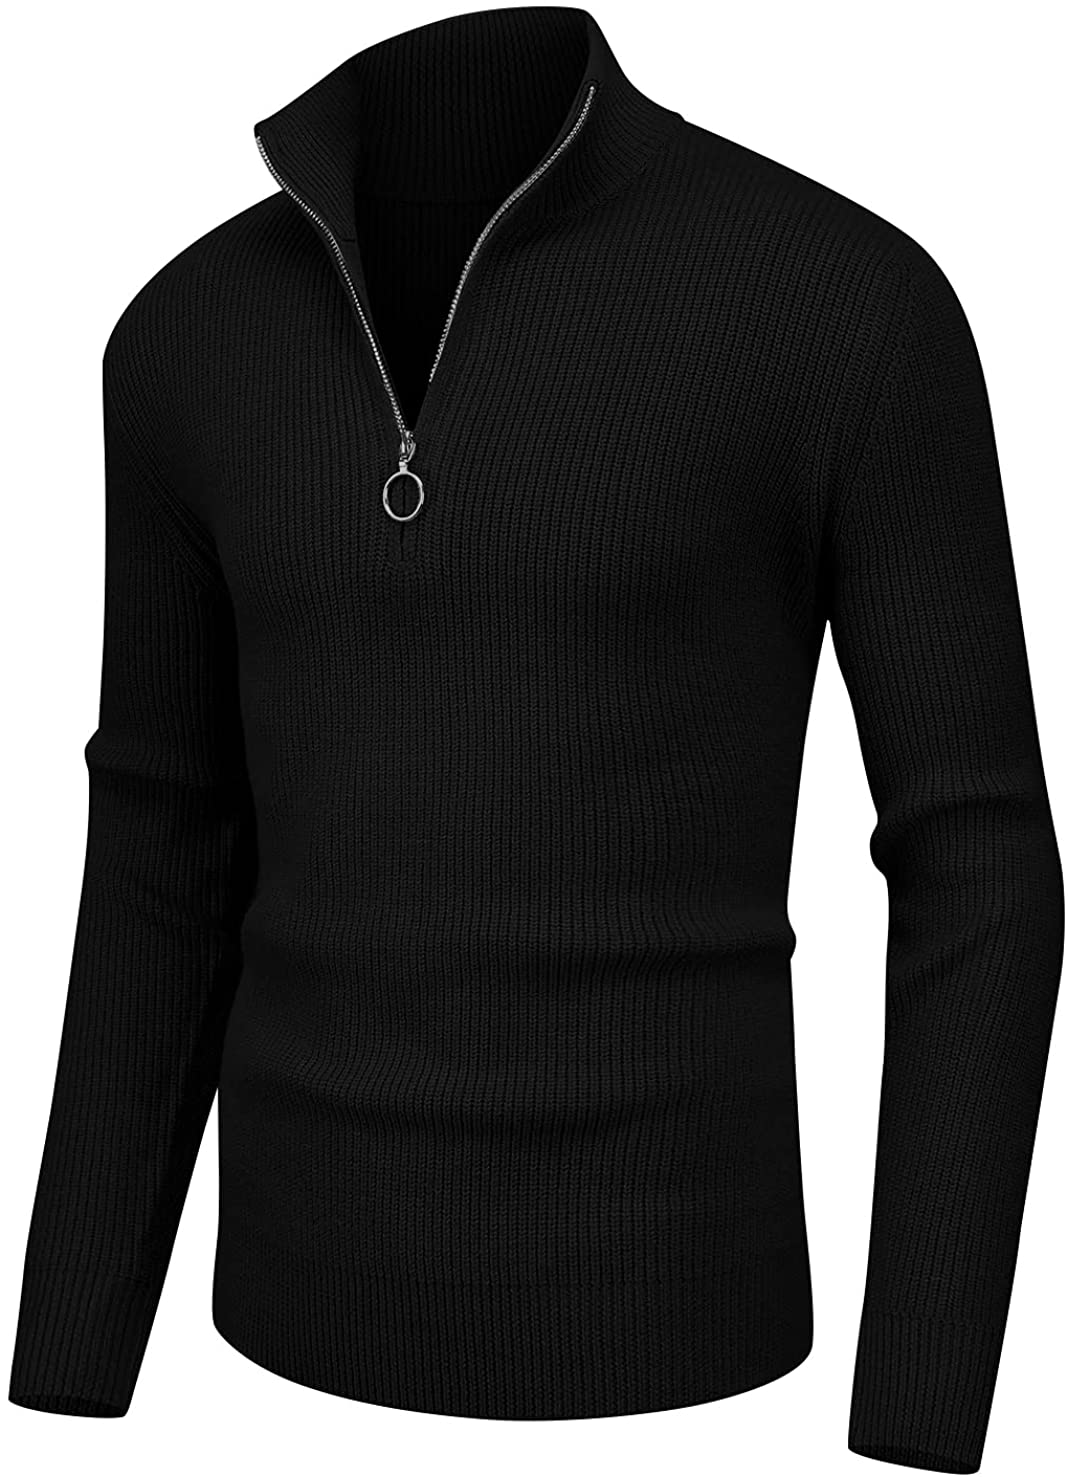 Sailwind Men's Soft Sweaters Quarter Zip Pullover Classic Ribbed ...